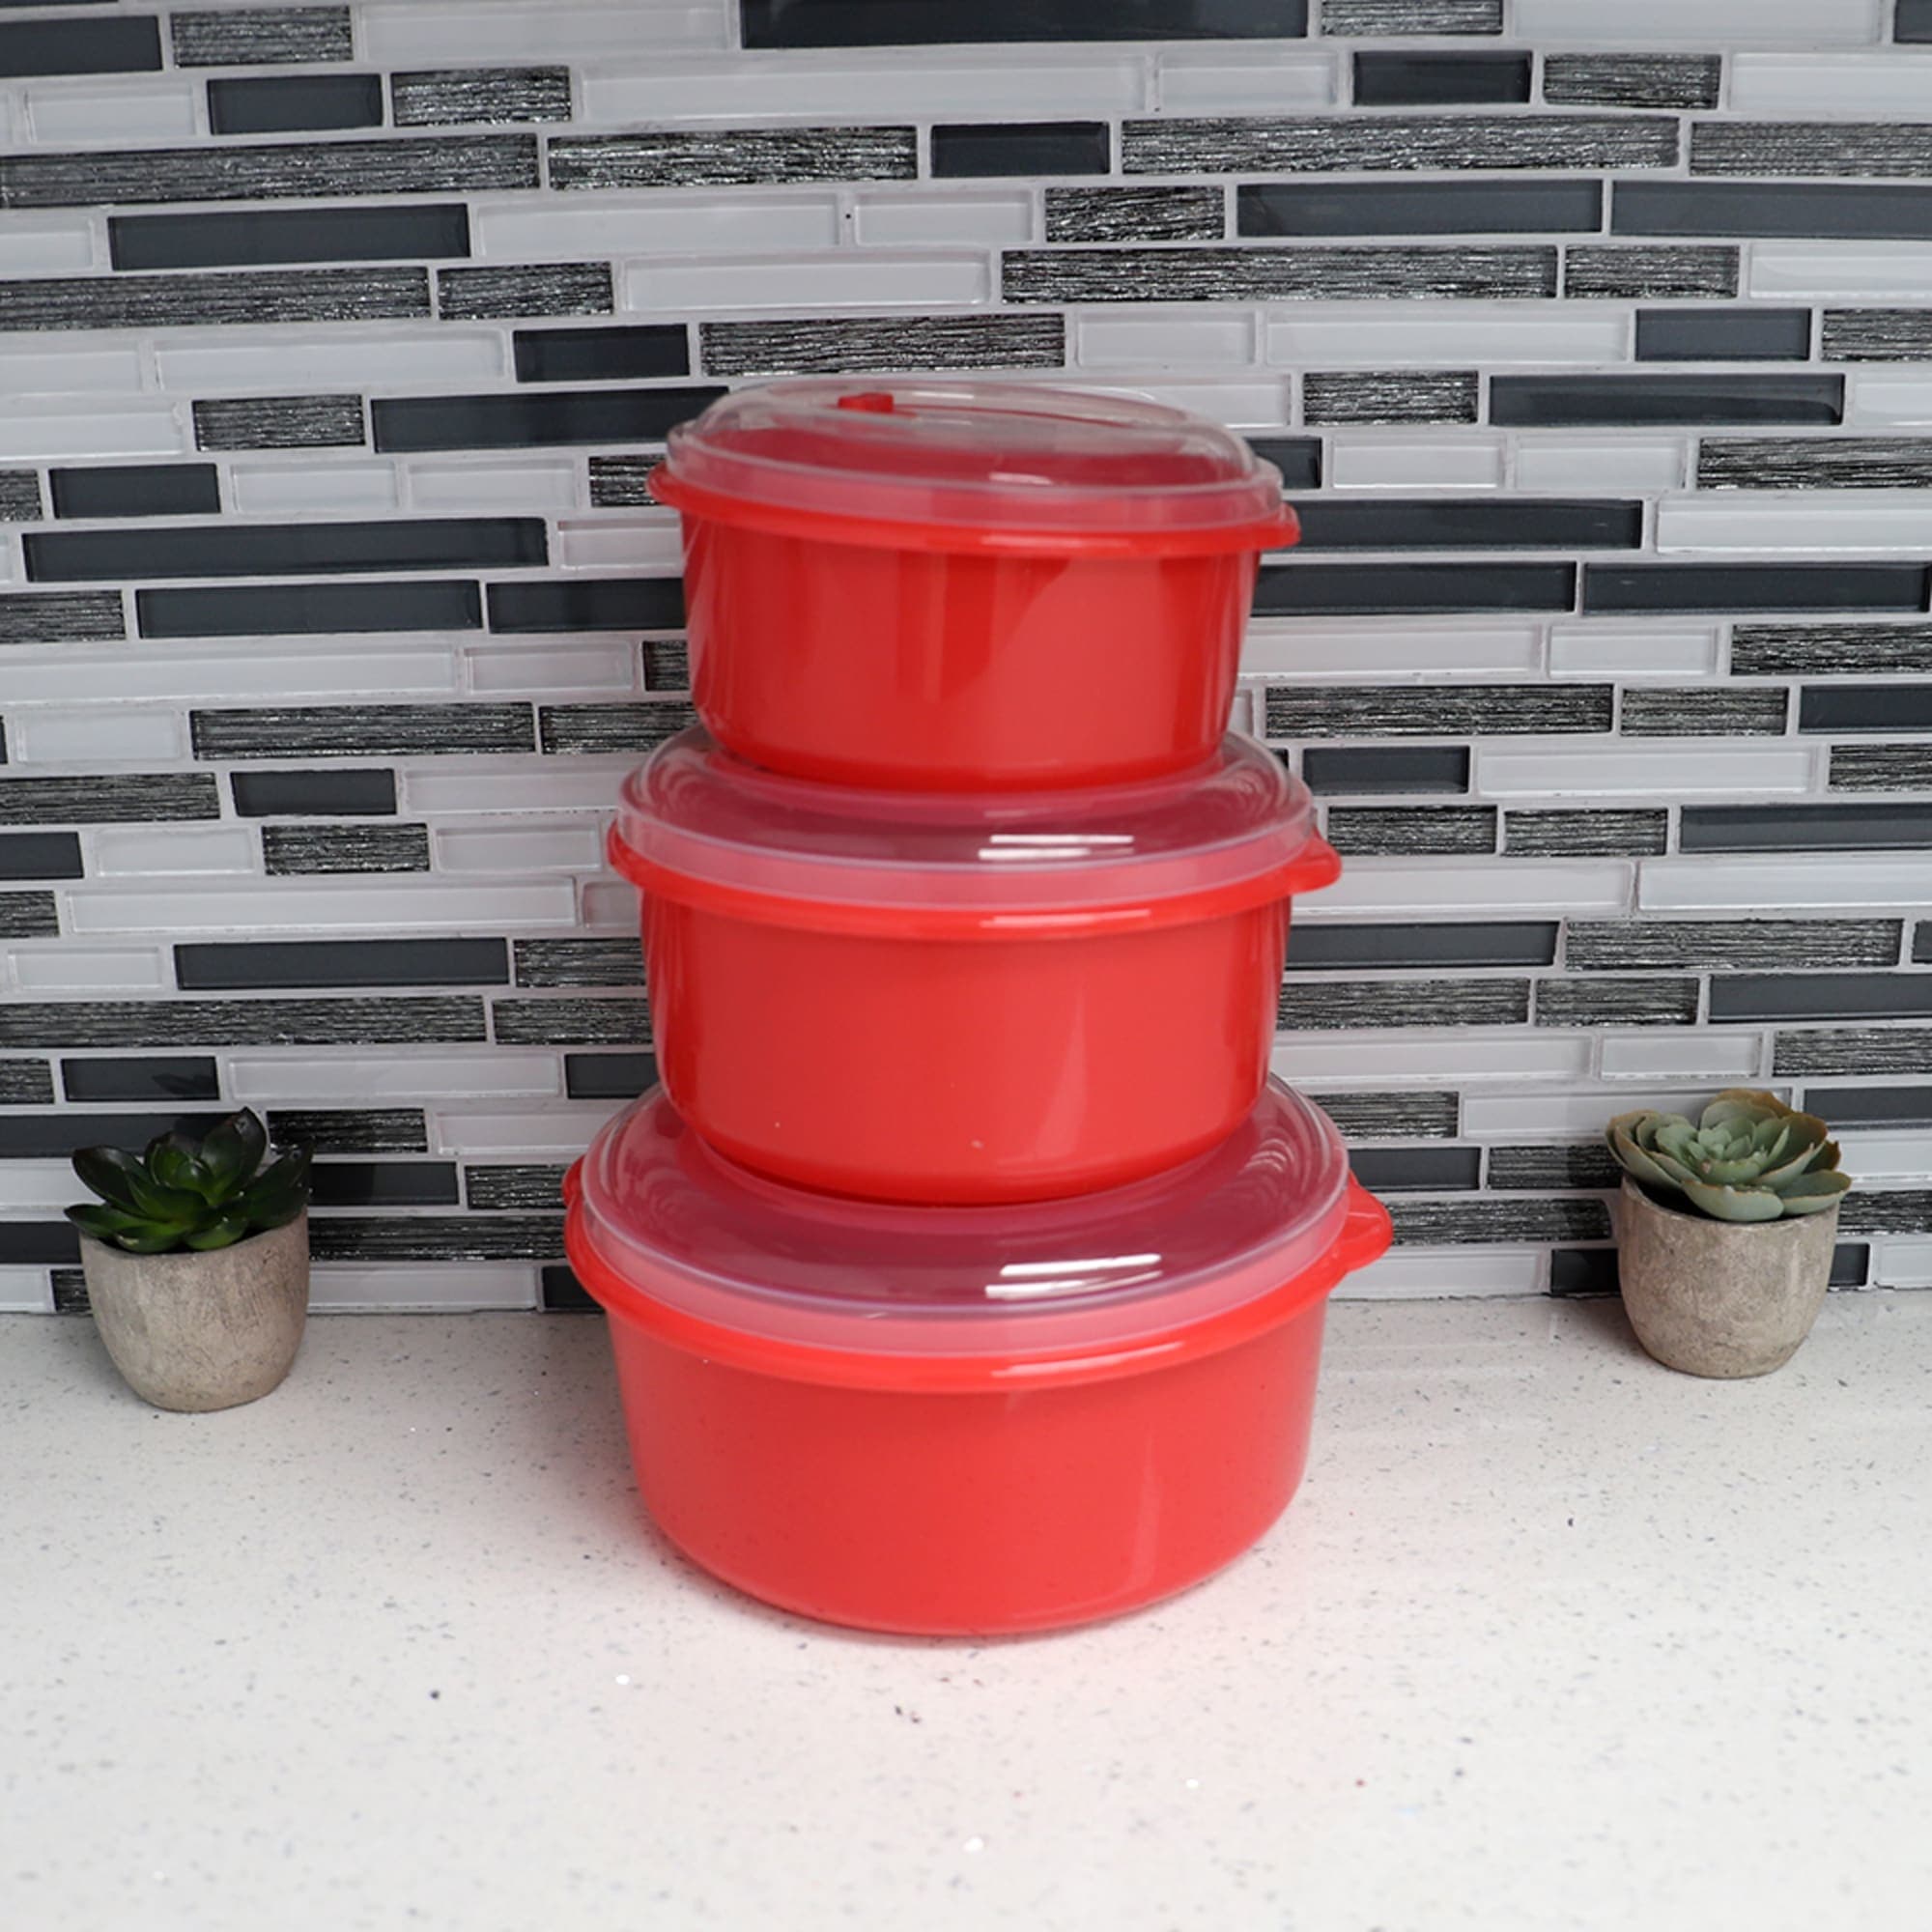 Home Basics Microwave Safe Plastic Round Food Storage Containers, (Pack of  3), Red, FOOD PREP